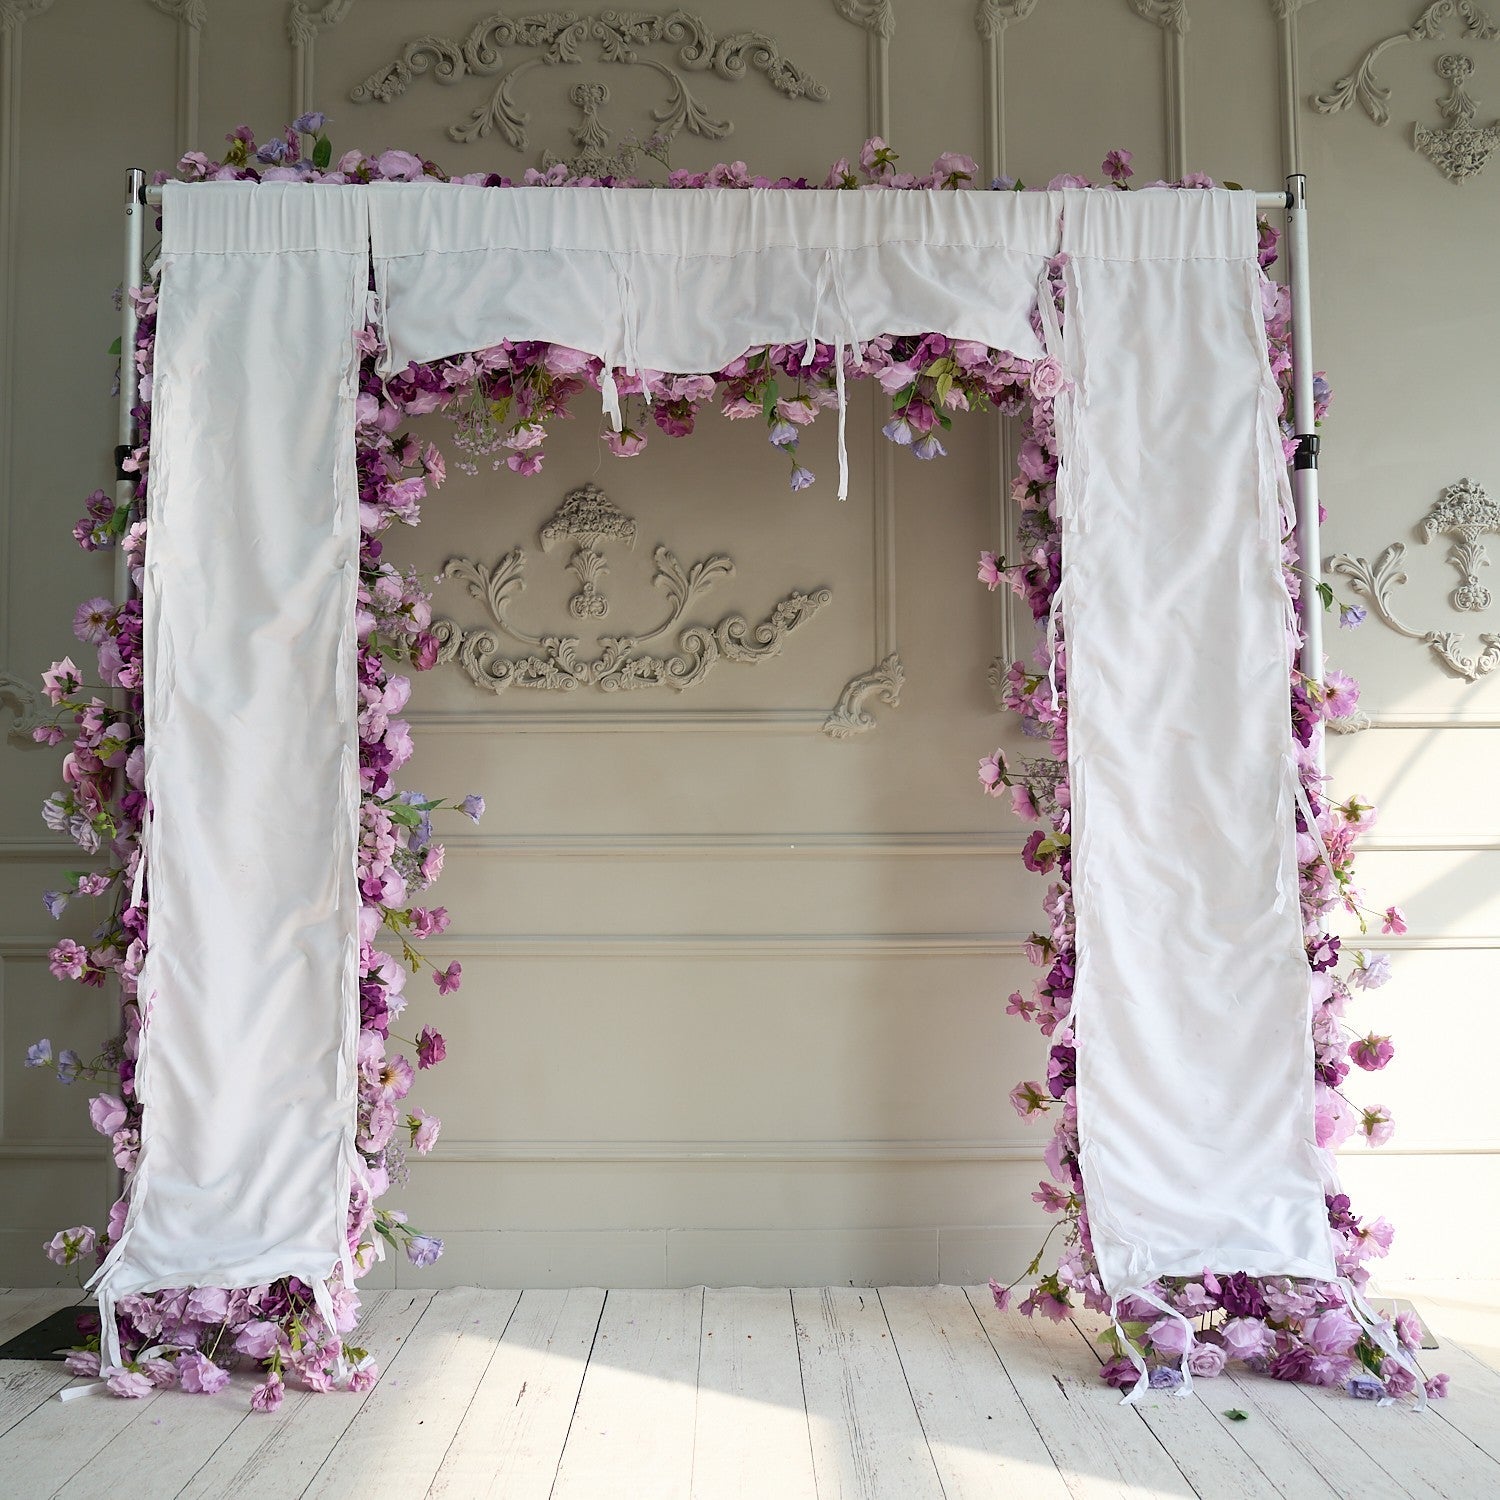 The purple roses florals flower wall is fixed to a cloth.